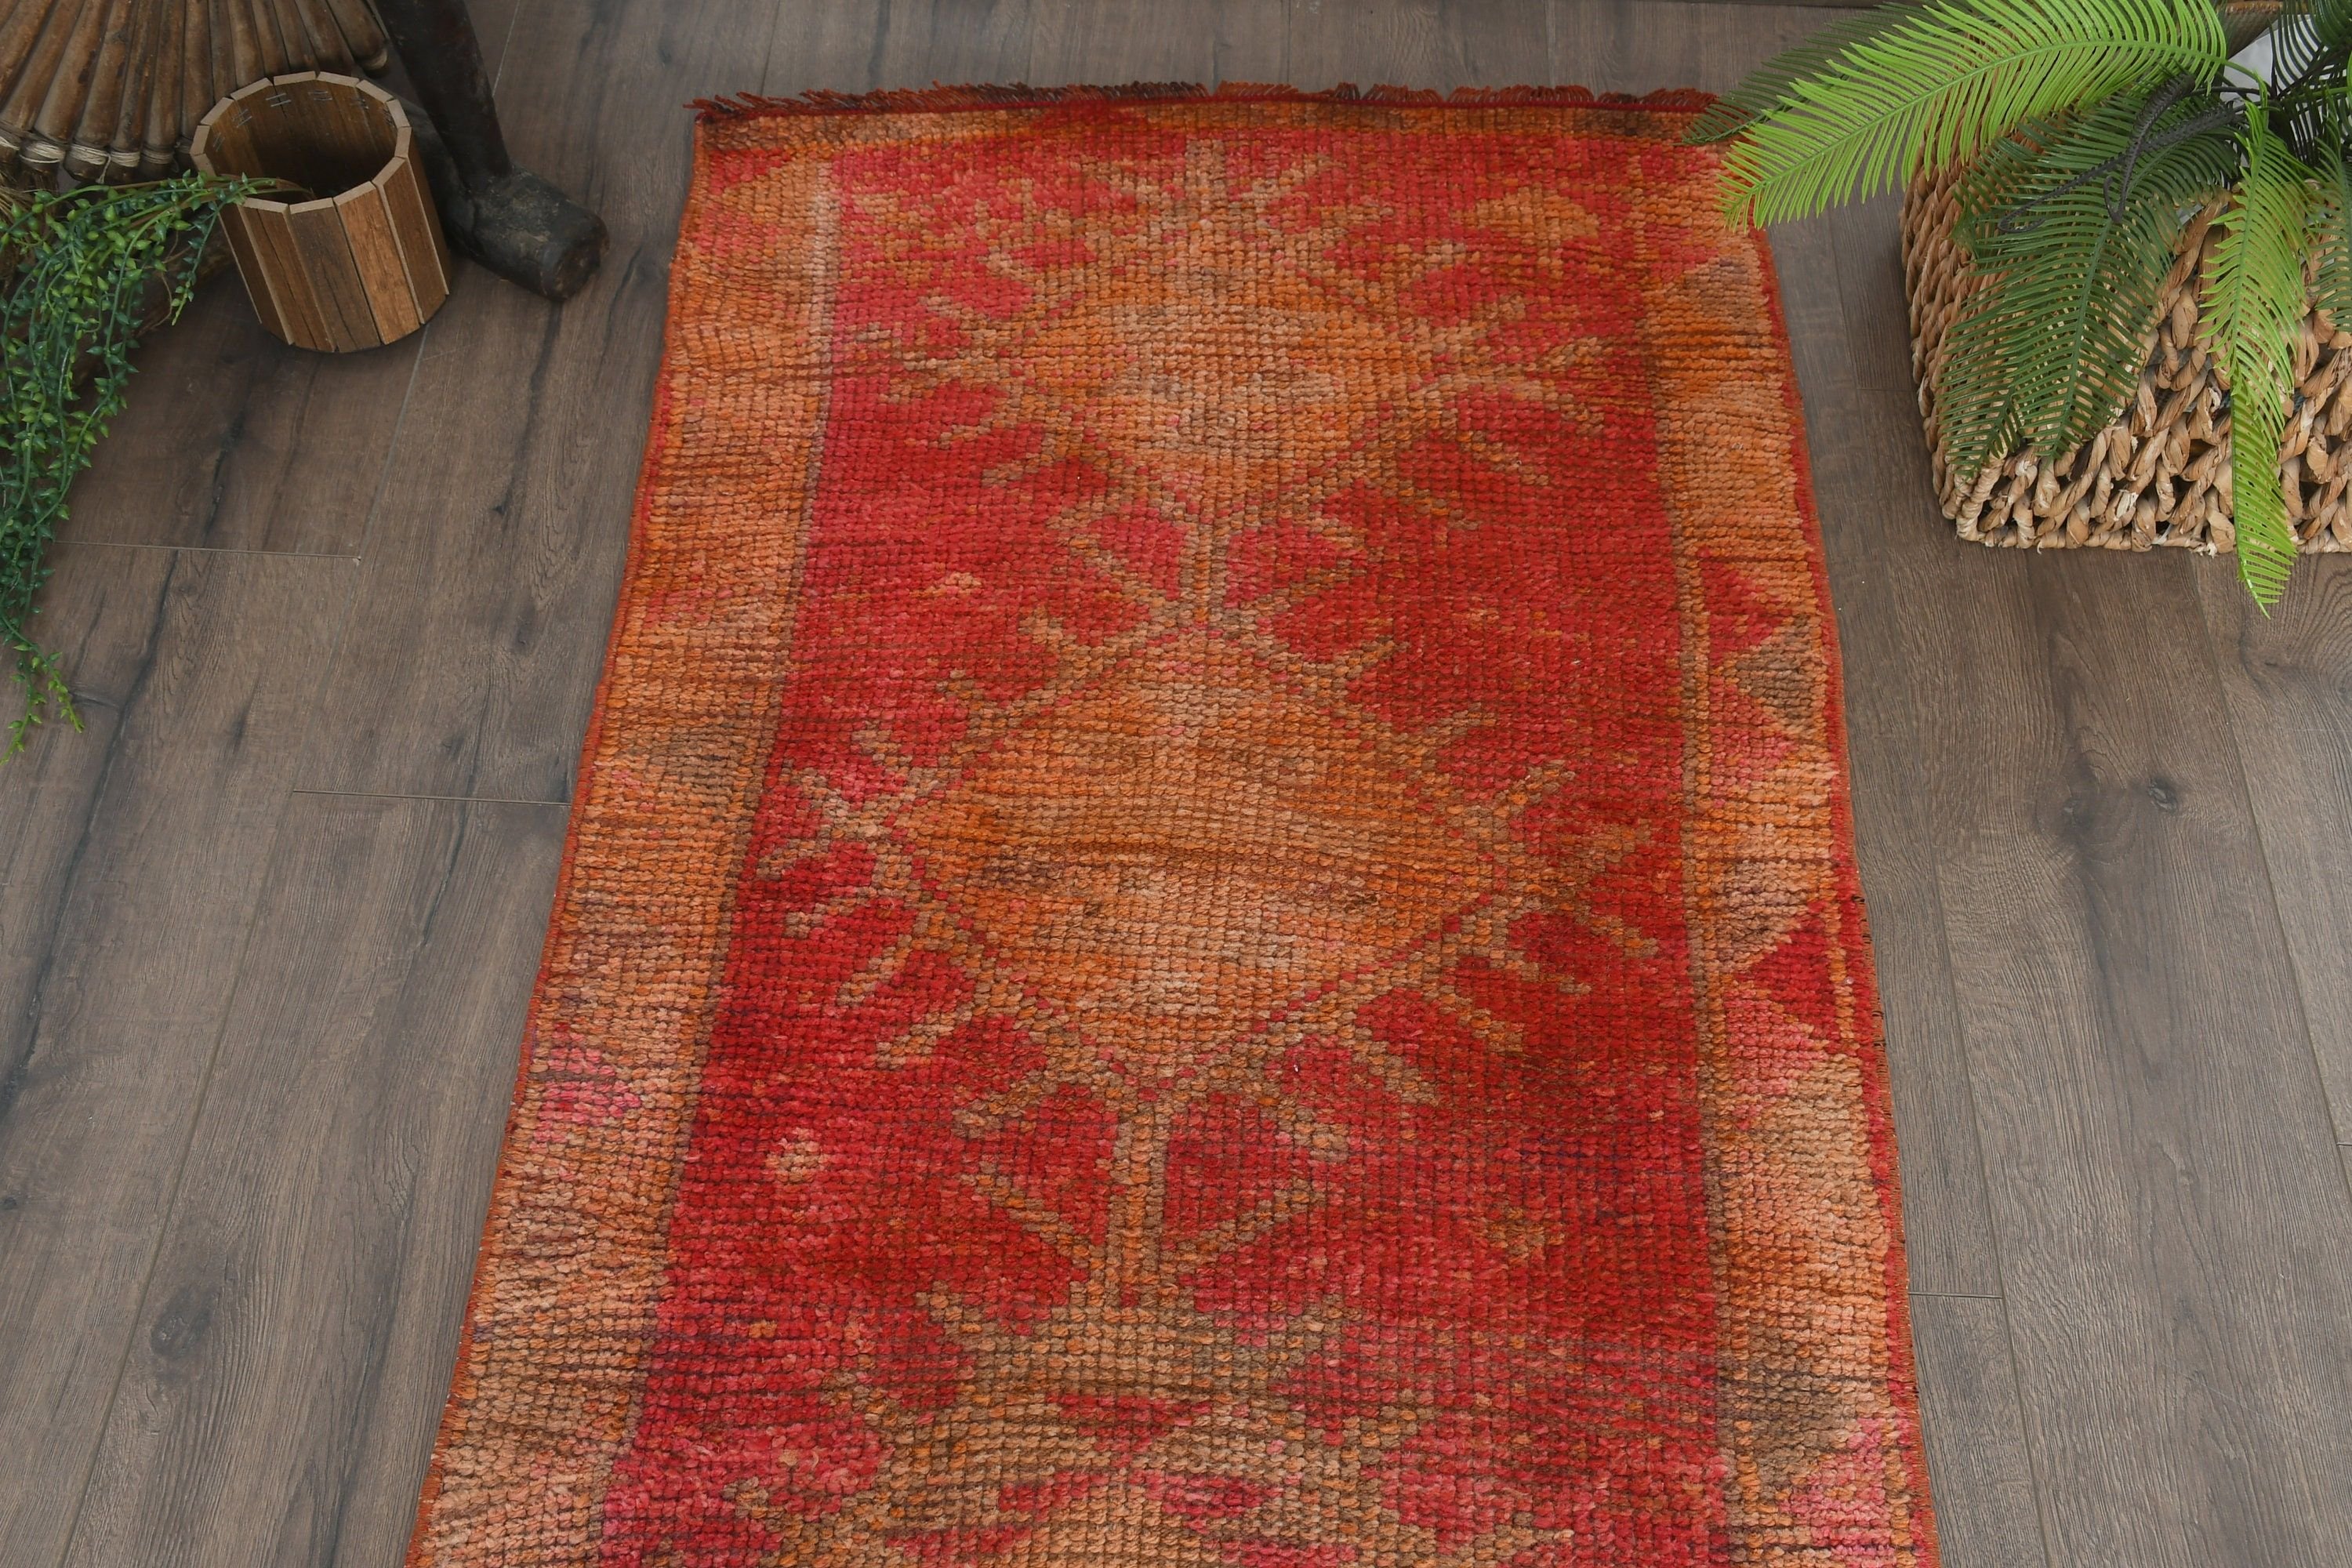 Eclectic Rug, Vintage Rug, Turkish Rug, Wool Rugs, Kitchen Rug, 2.5x9.7 ft Runner Rugs, Rugs for Kitchen, Anatolian Rugs, Red Oriental Rugs